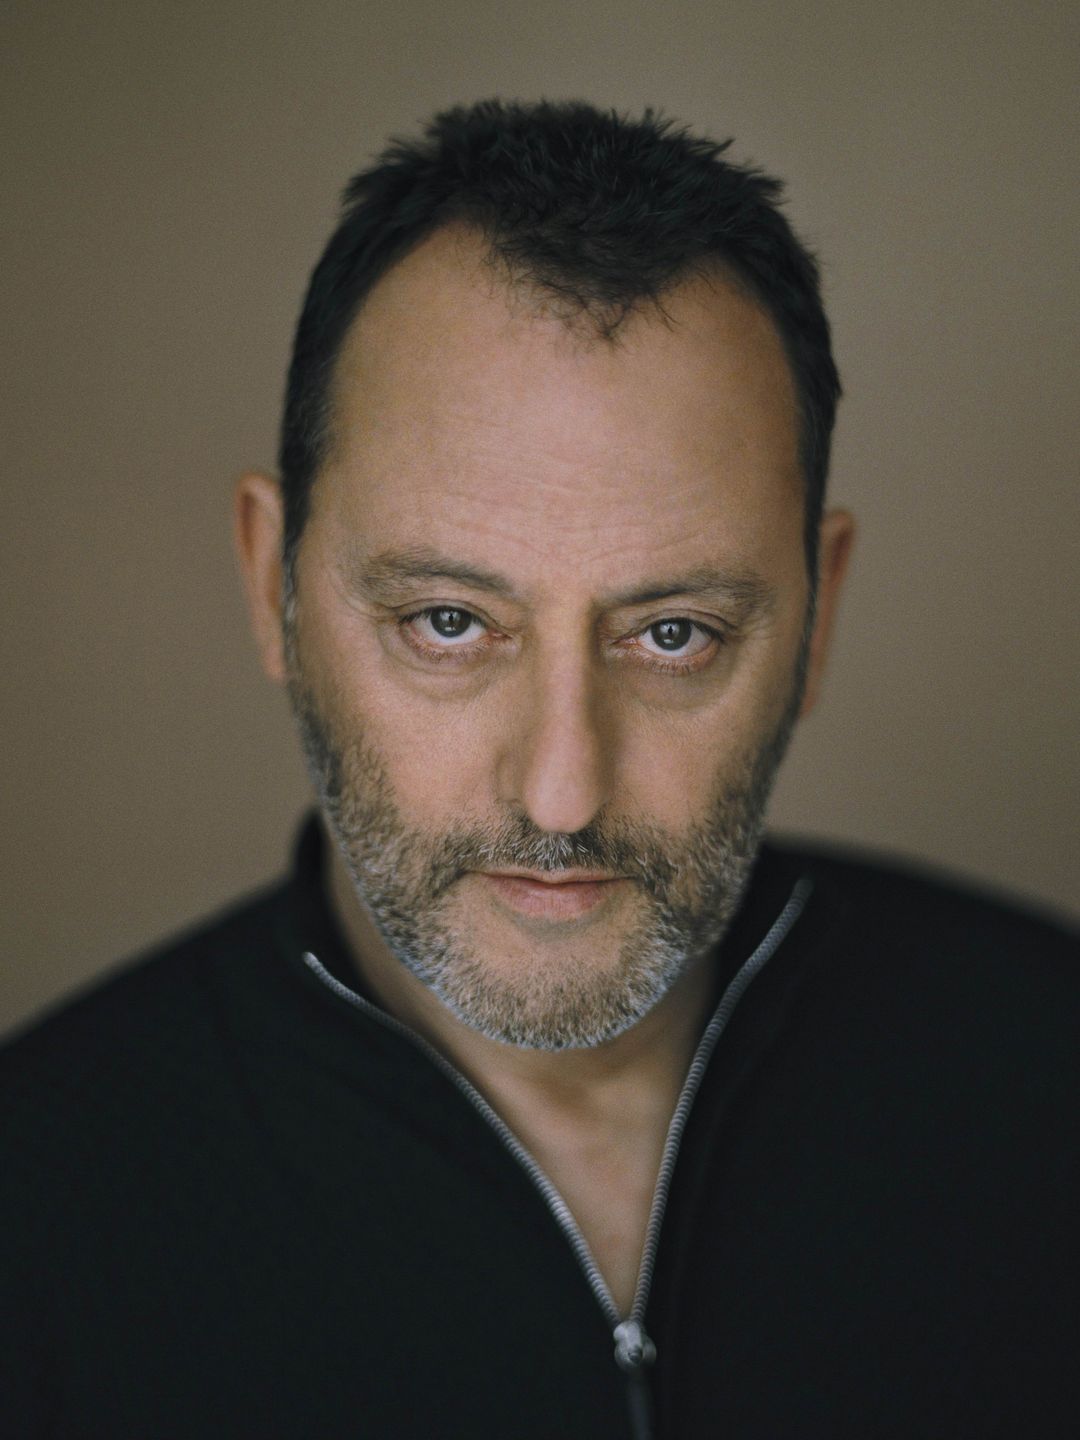 Jean Reno how did he became famous